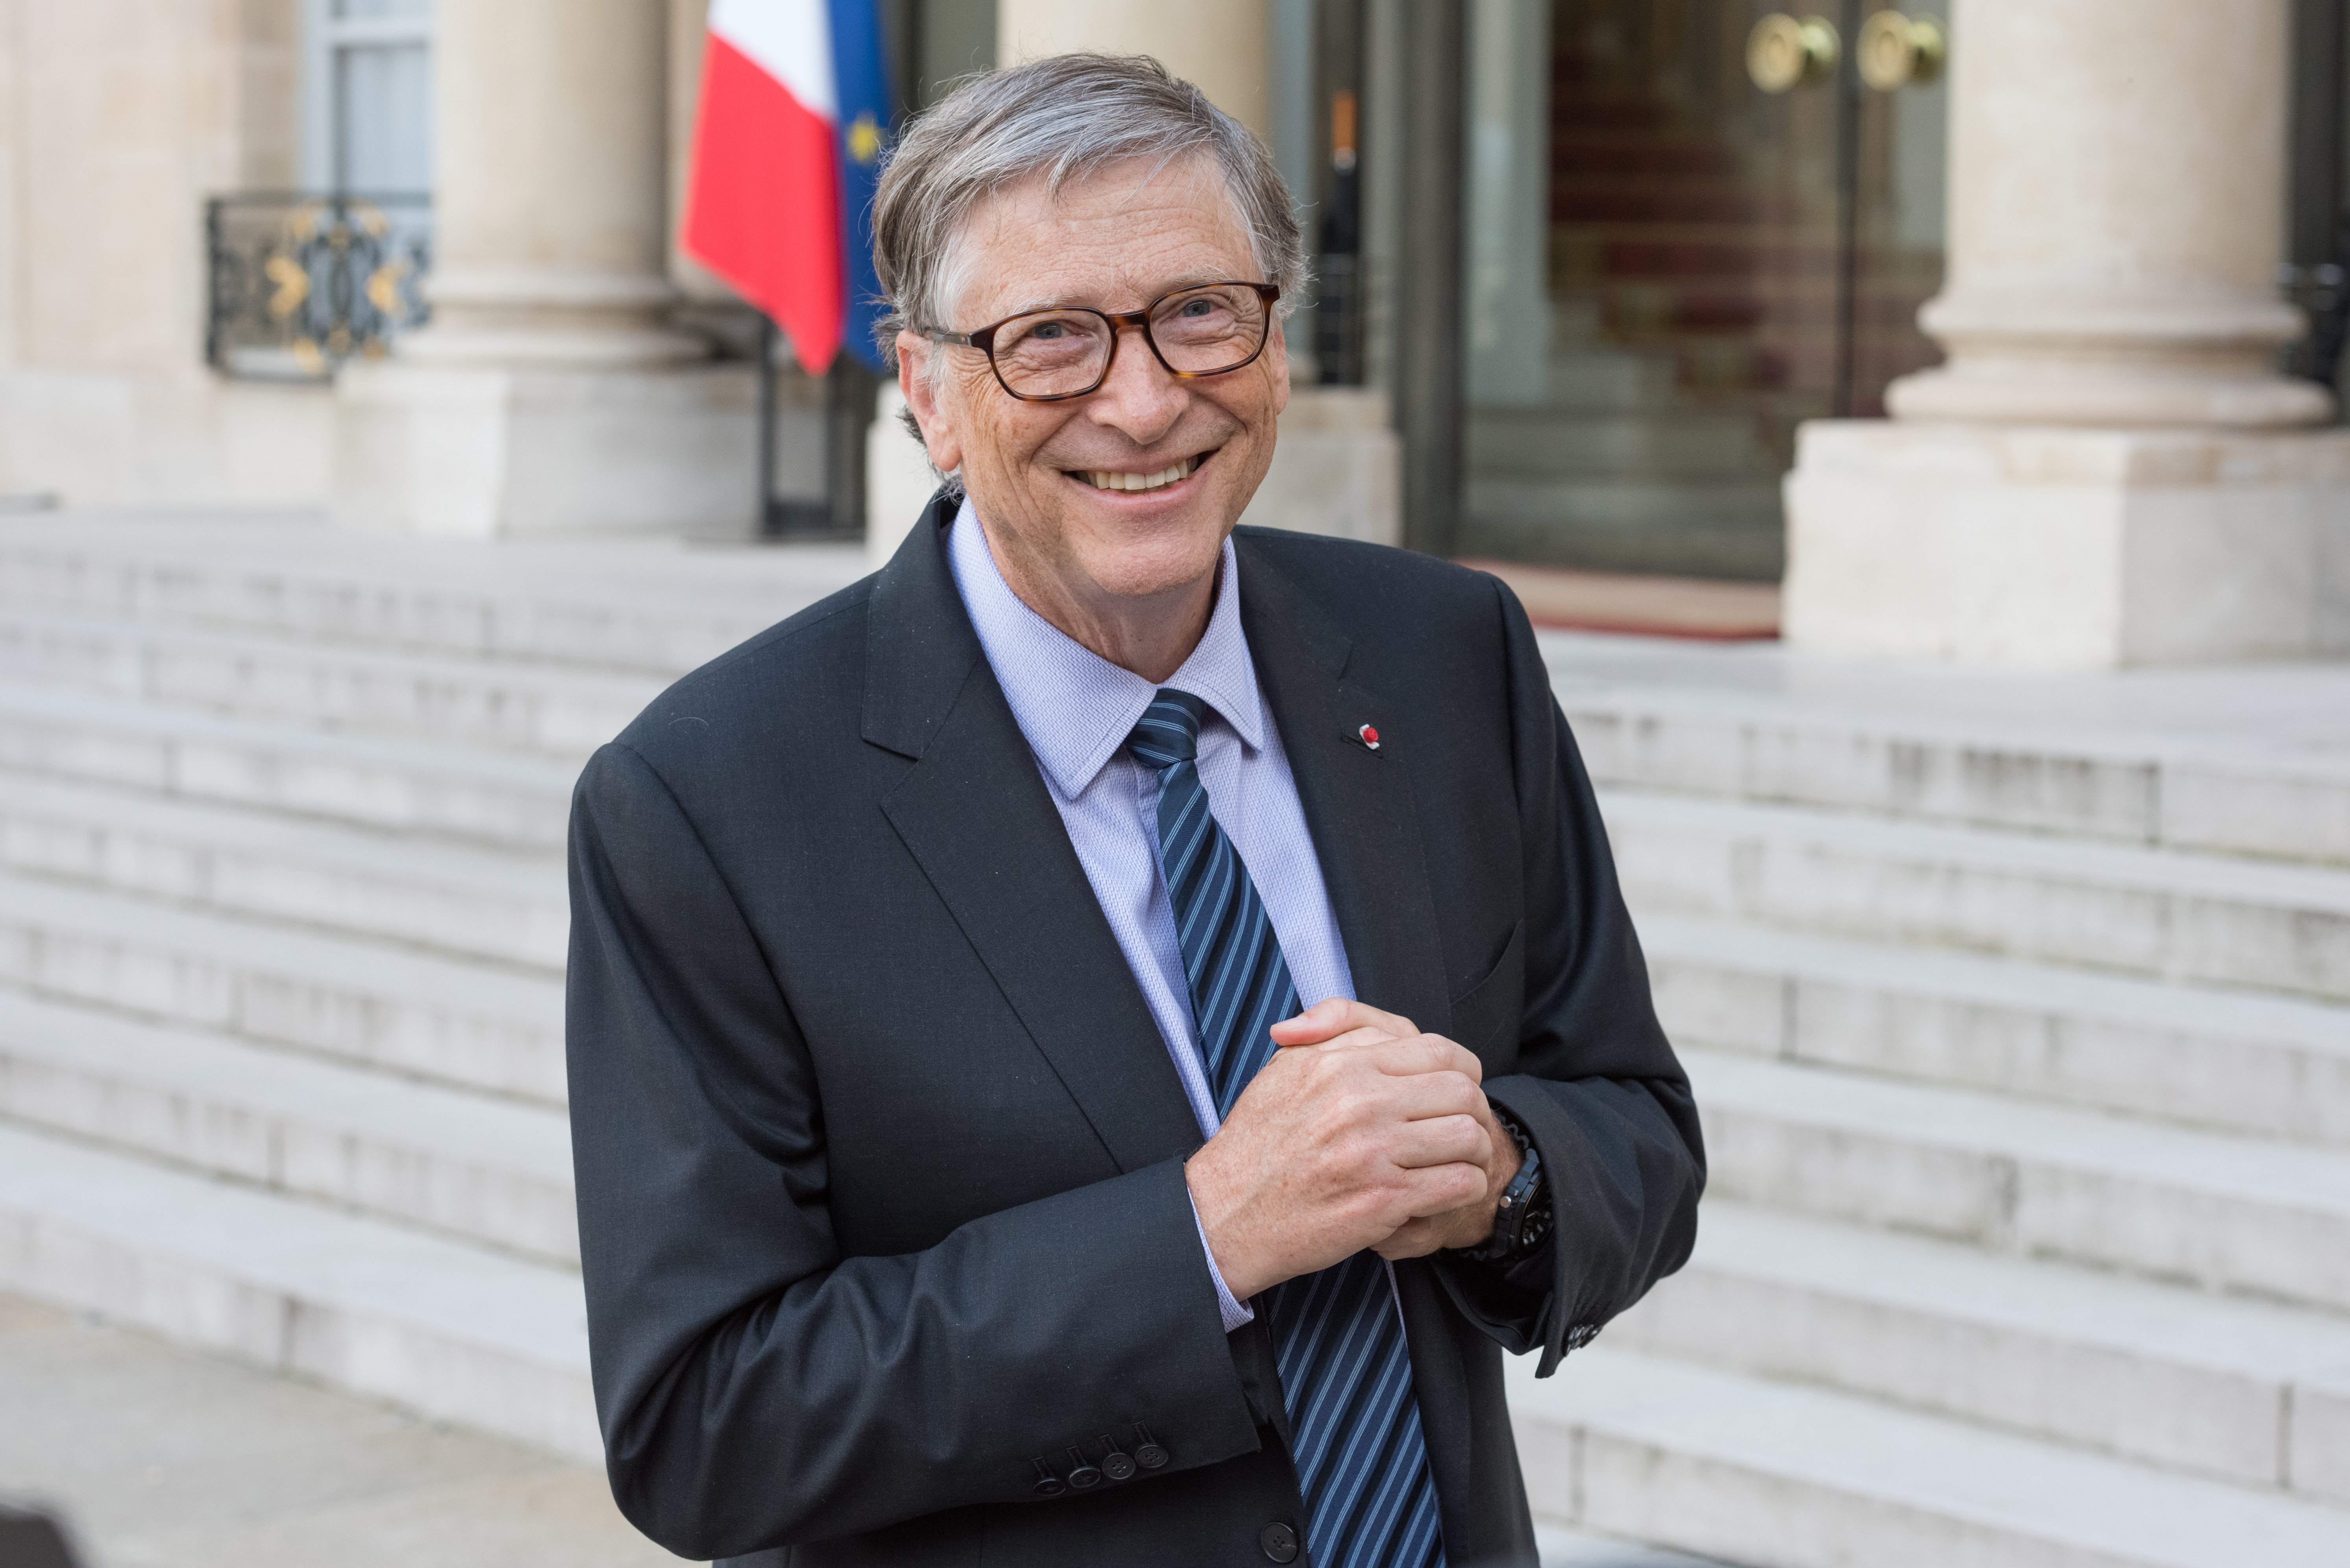 Bill Gates at the Elysee Palace in April 16, 2018, Paris, France | Photo: Shutterstock